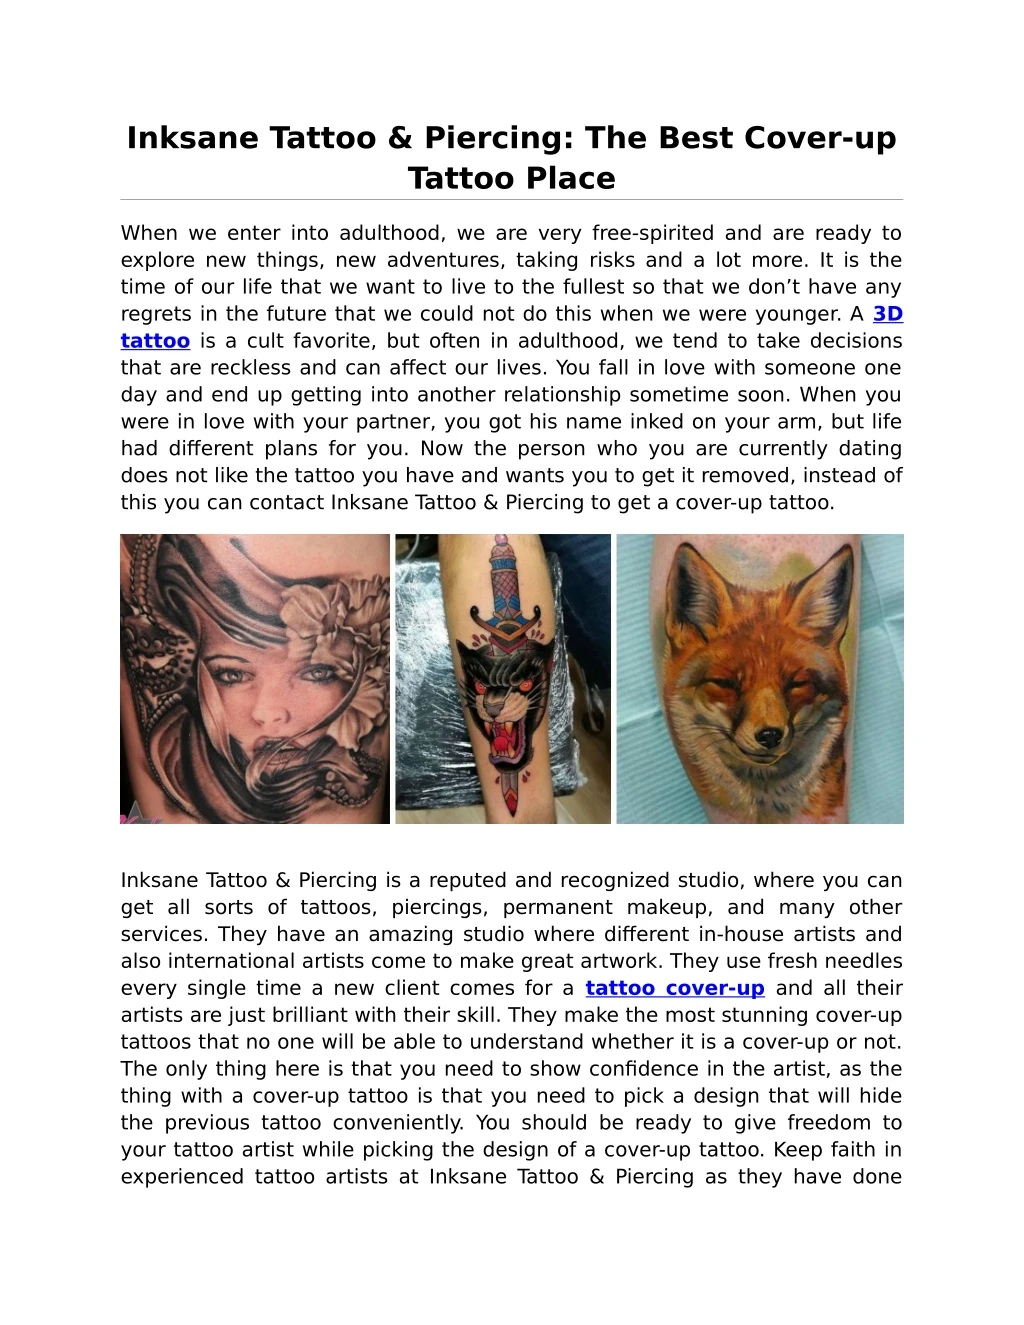 inksane tattoo piercing the best cover up tattoo